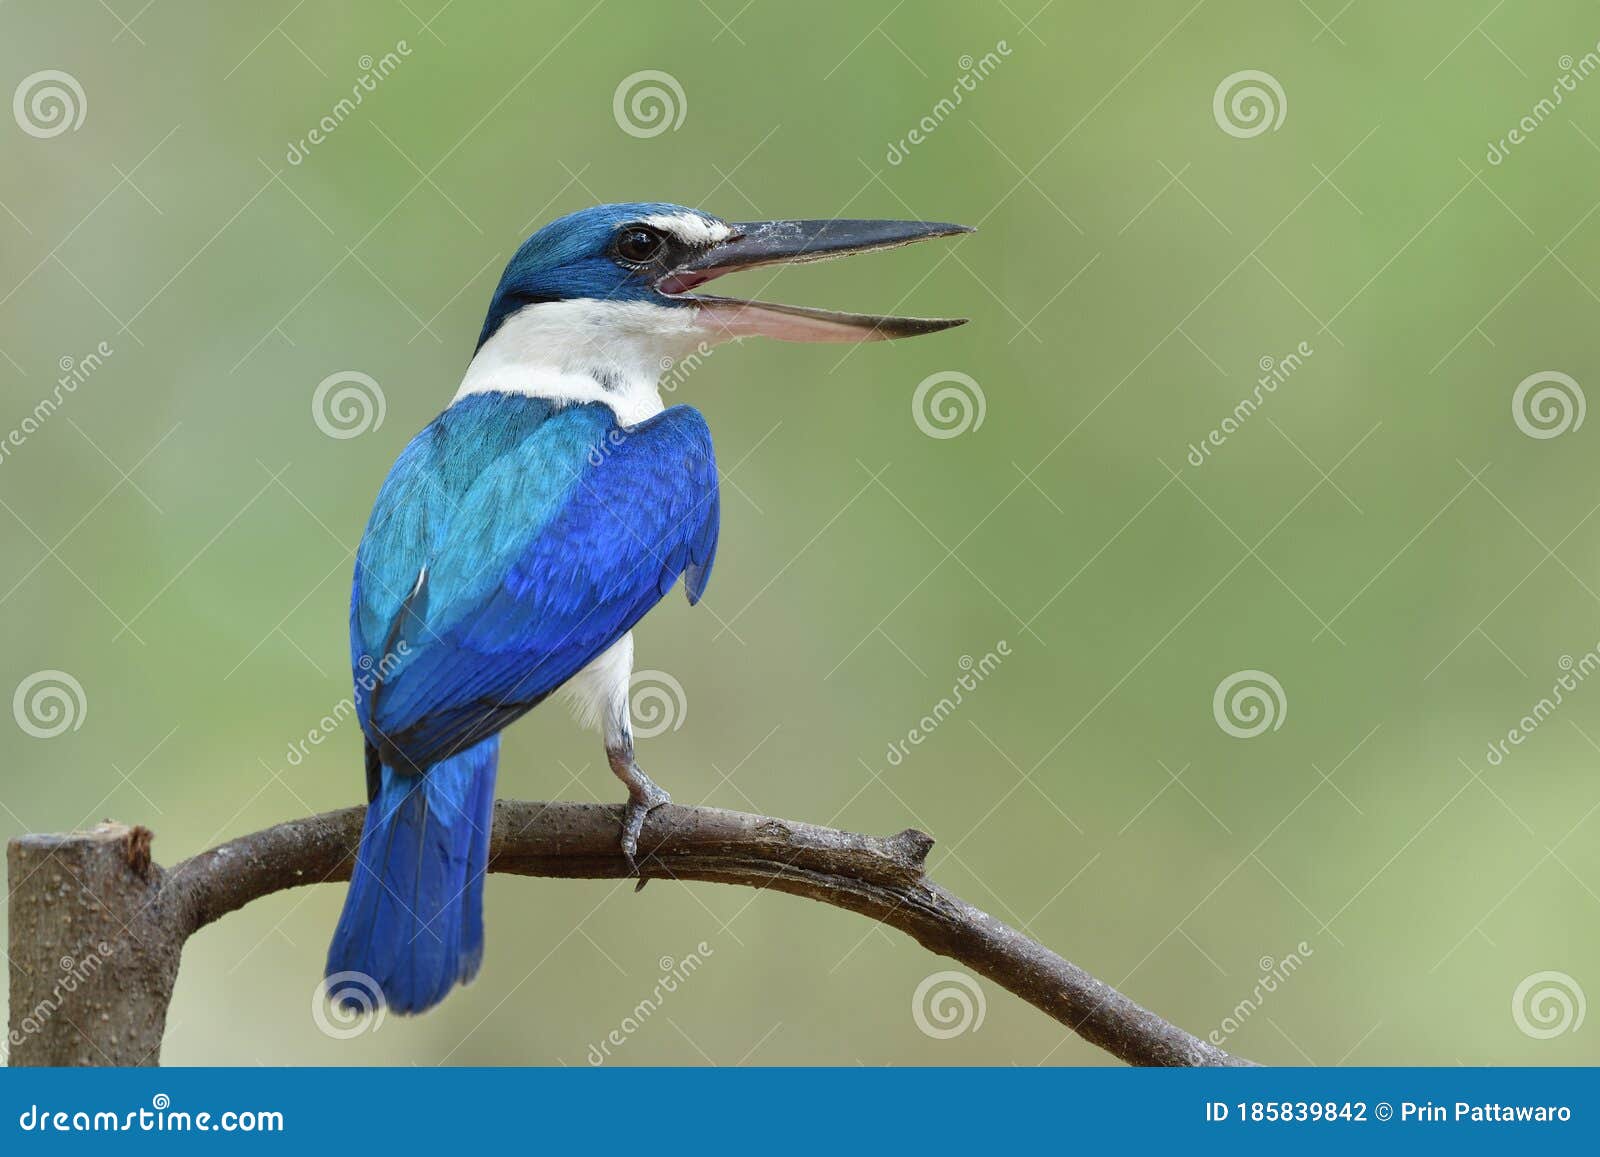 Collared Kingfisher Singing with Widely Open Large Sharp Beaks ...